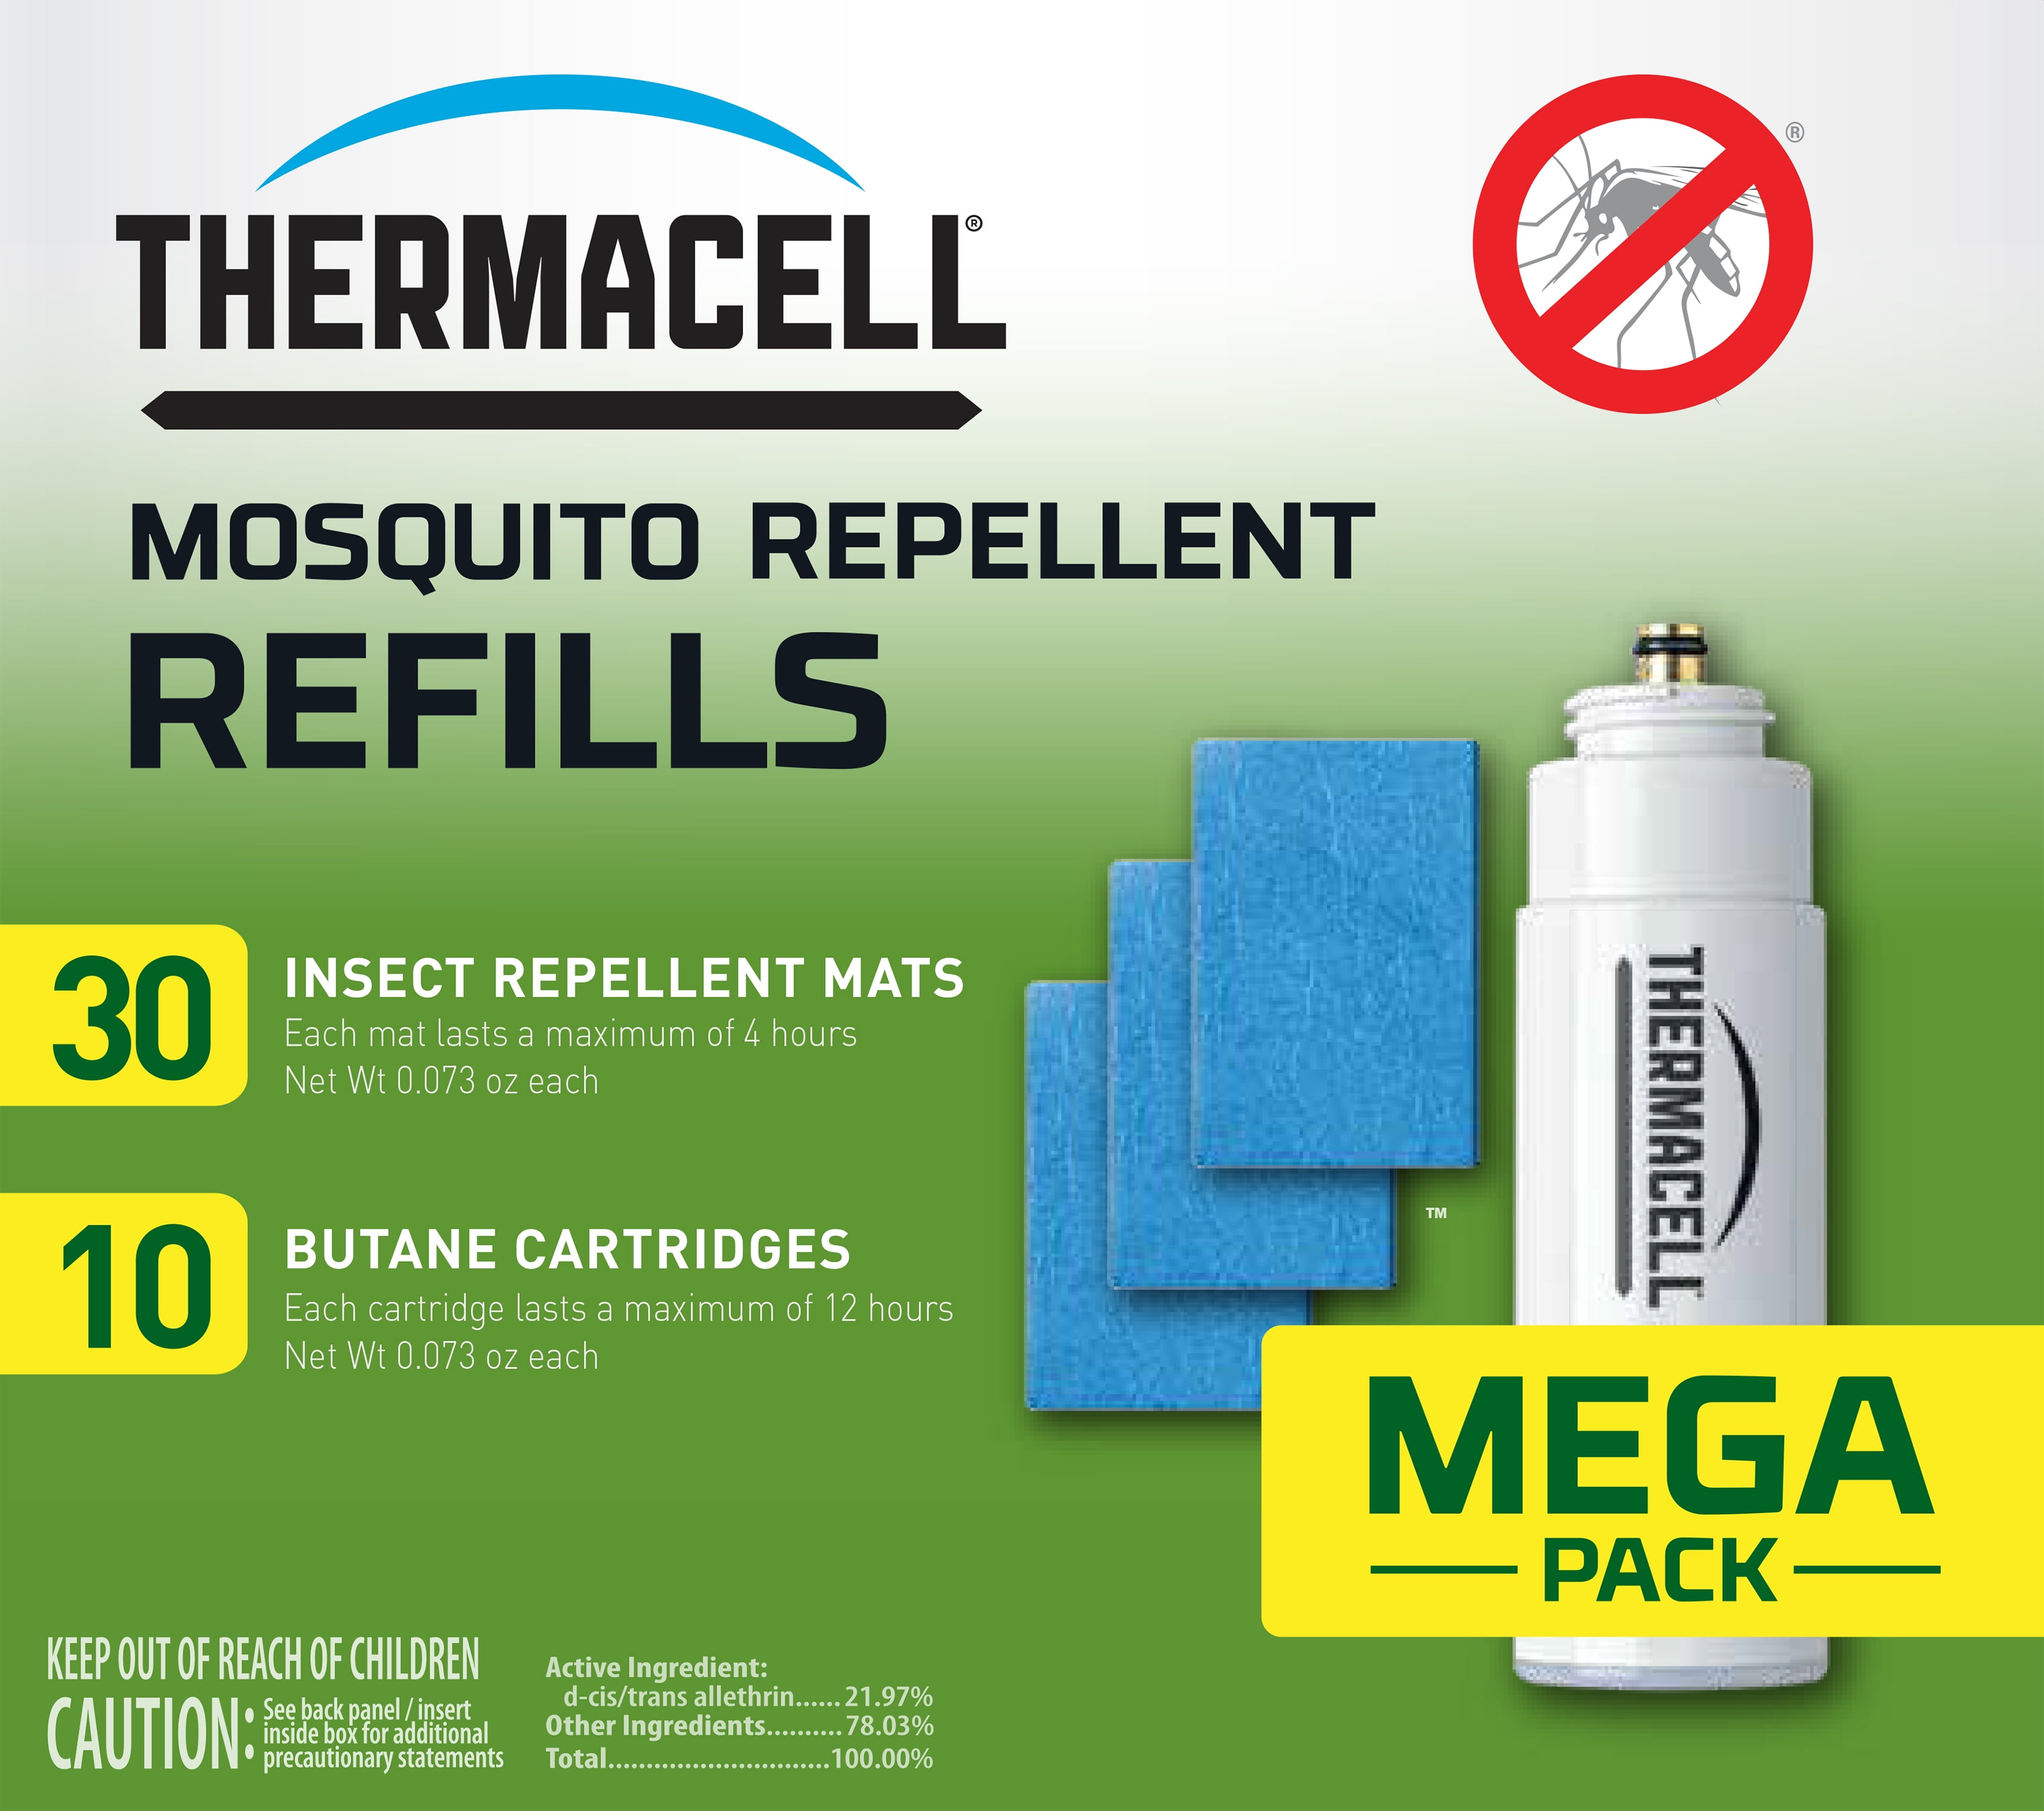 Thermacell Mega Pack Refill 